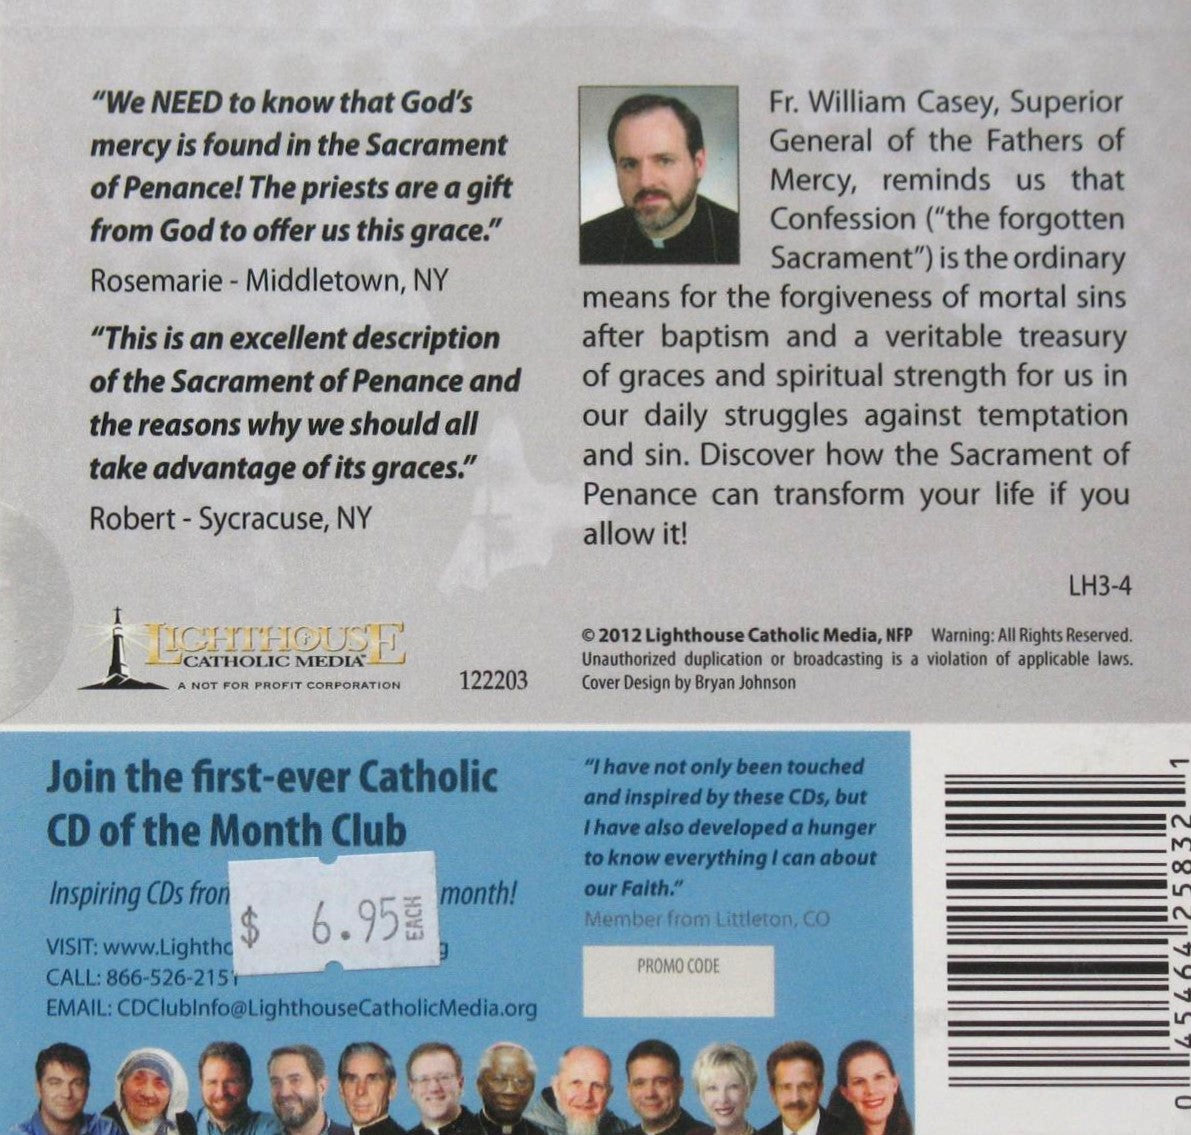 The Sacrament of Penance - CD Talk by Fr. William Casey